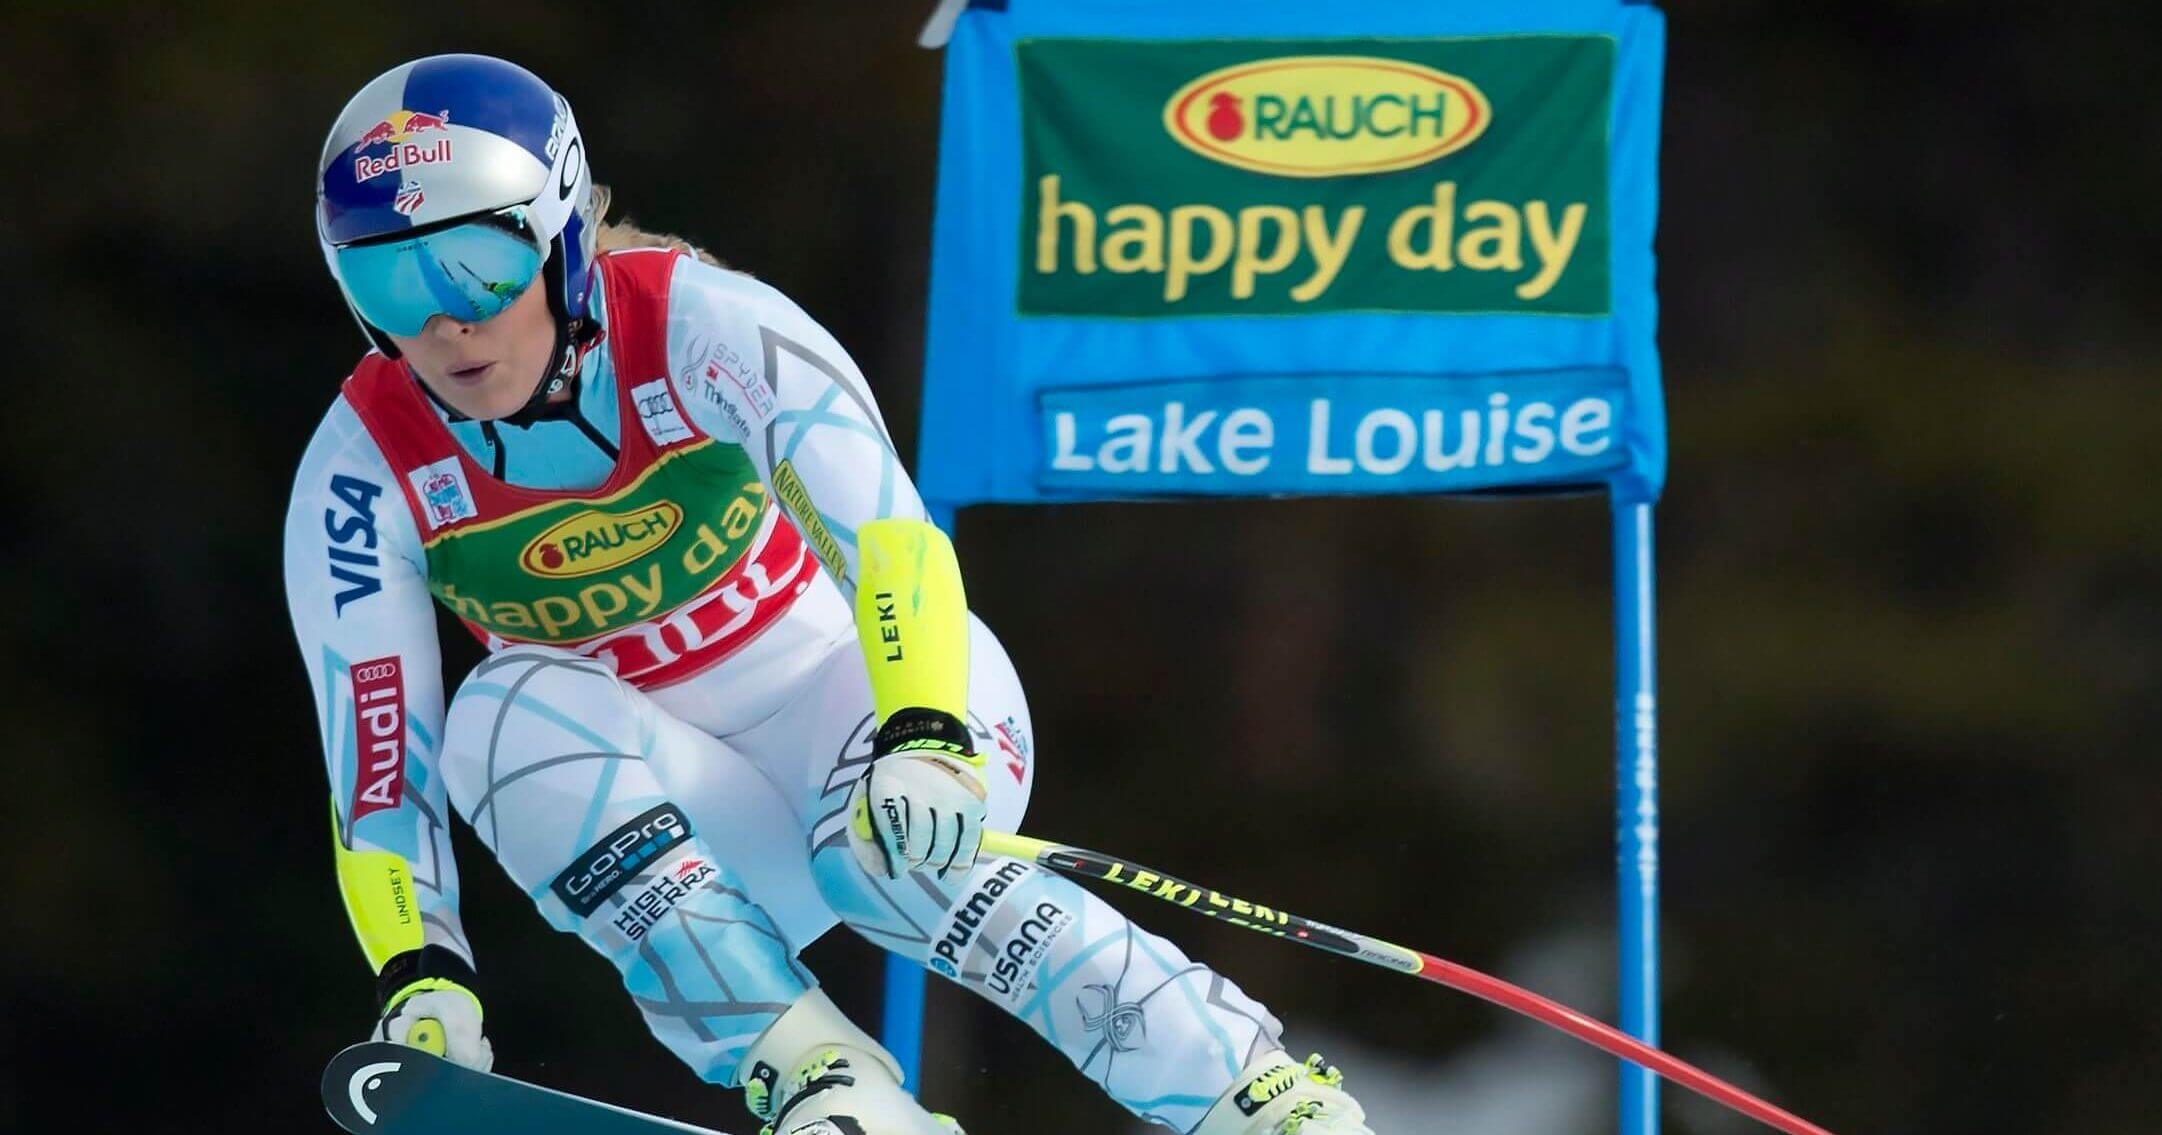 Lindsey Vonn skis her way to victory during the women's World Cup super-G skiing event in Lake Louise, Alberta, in 2015.